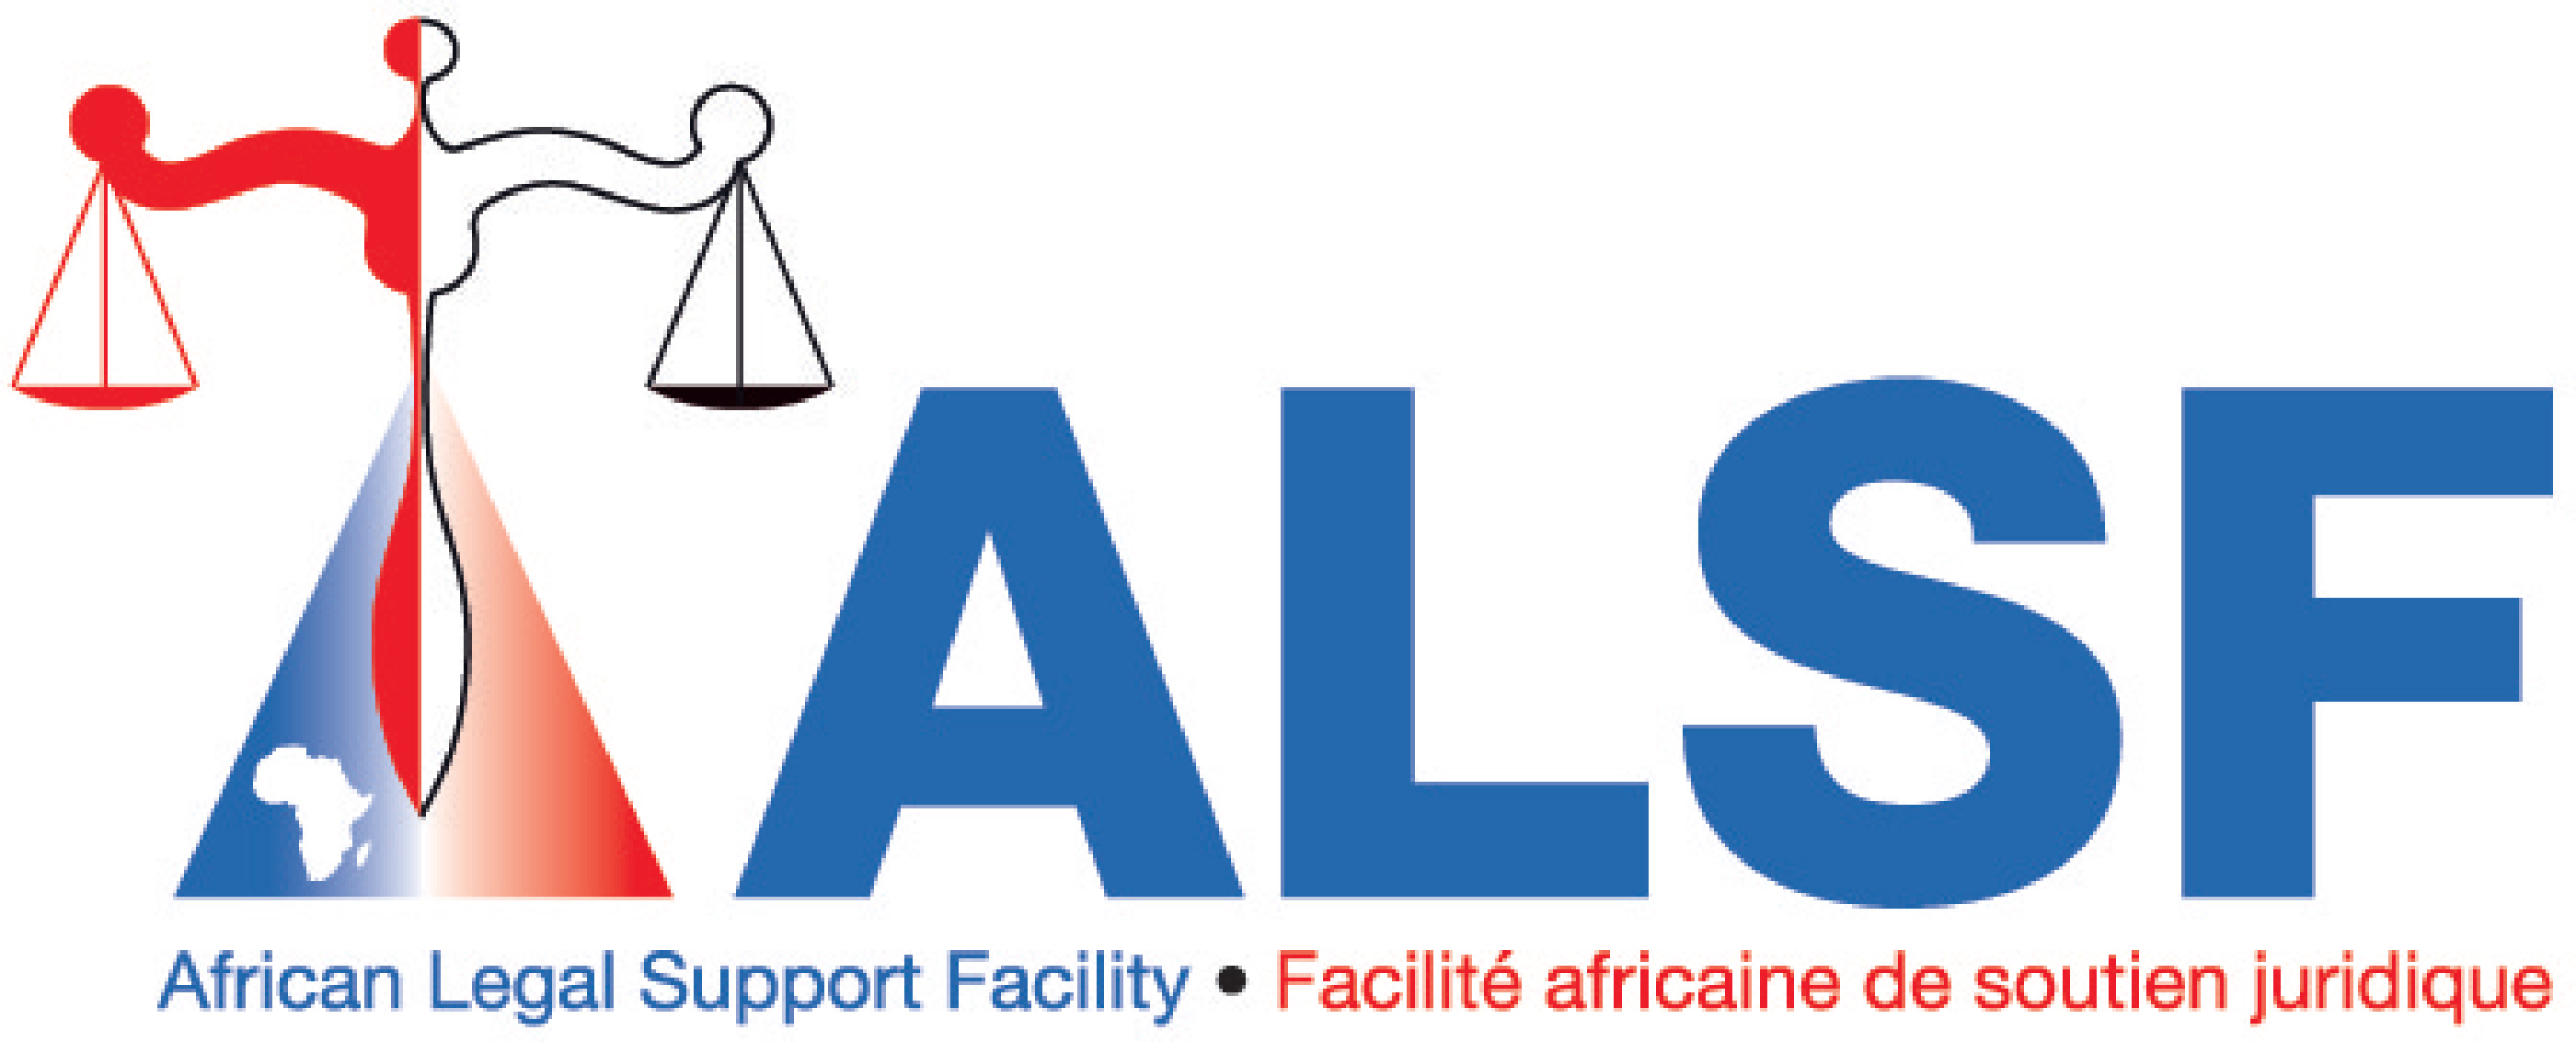 African Legal Support Facility